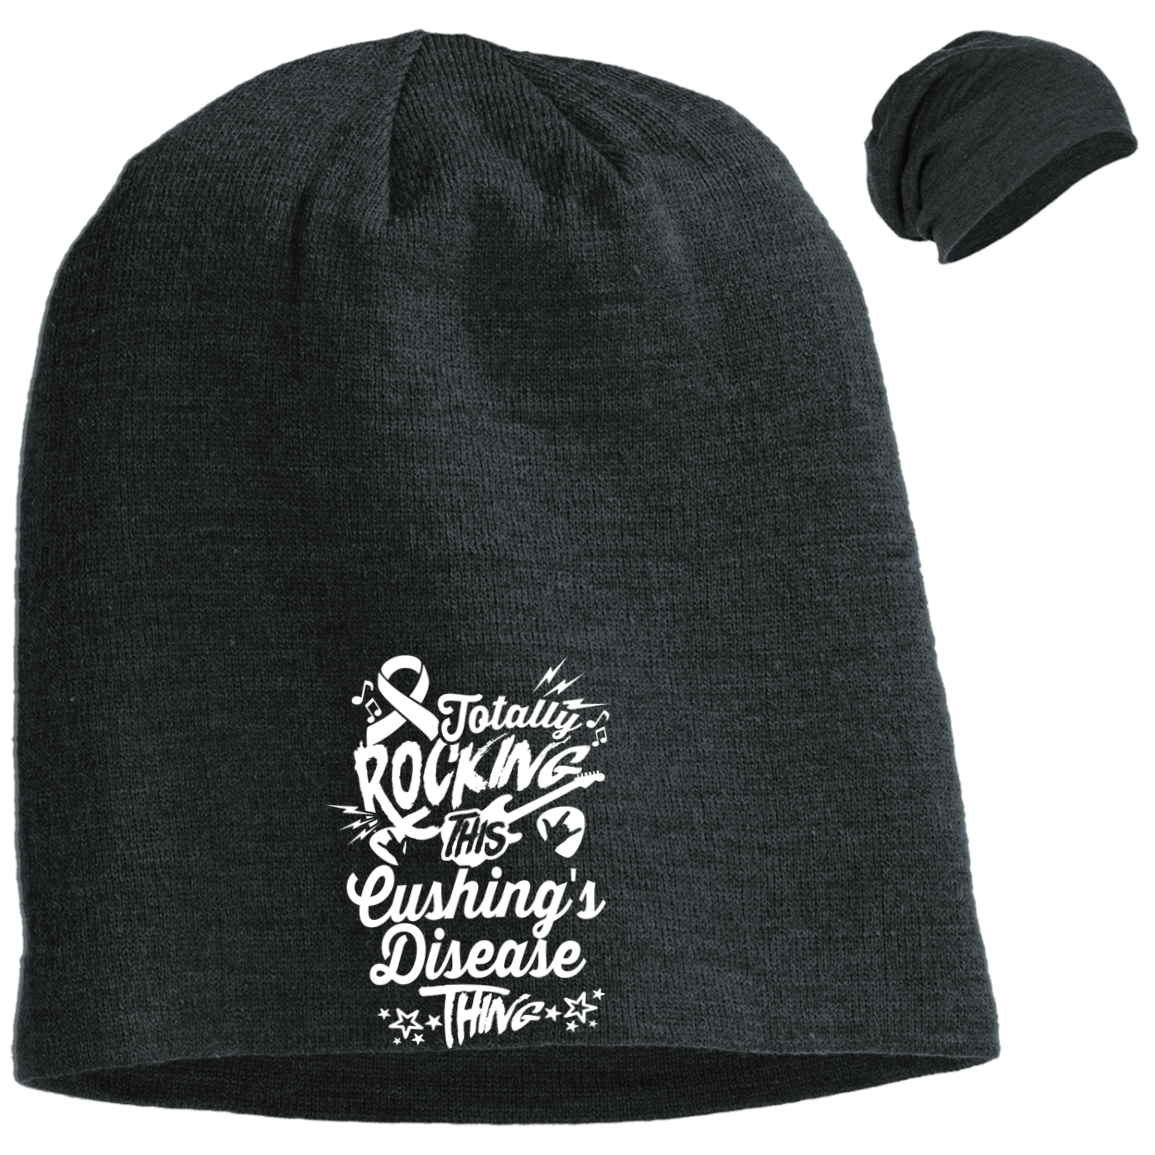 Rocking Cushings Disease Slouch Beanie - The Unchargeables